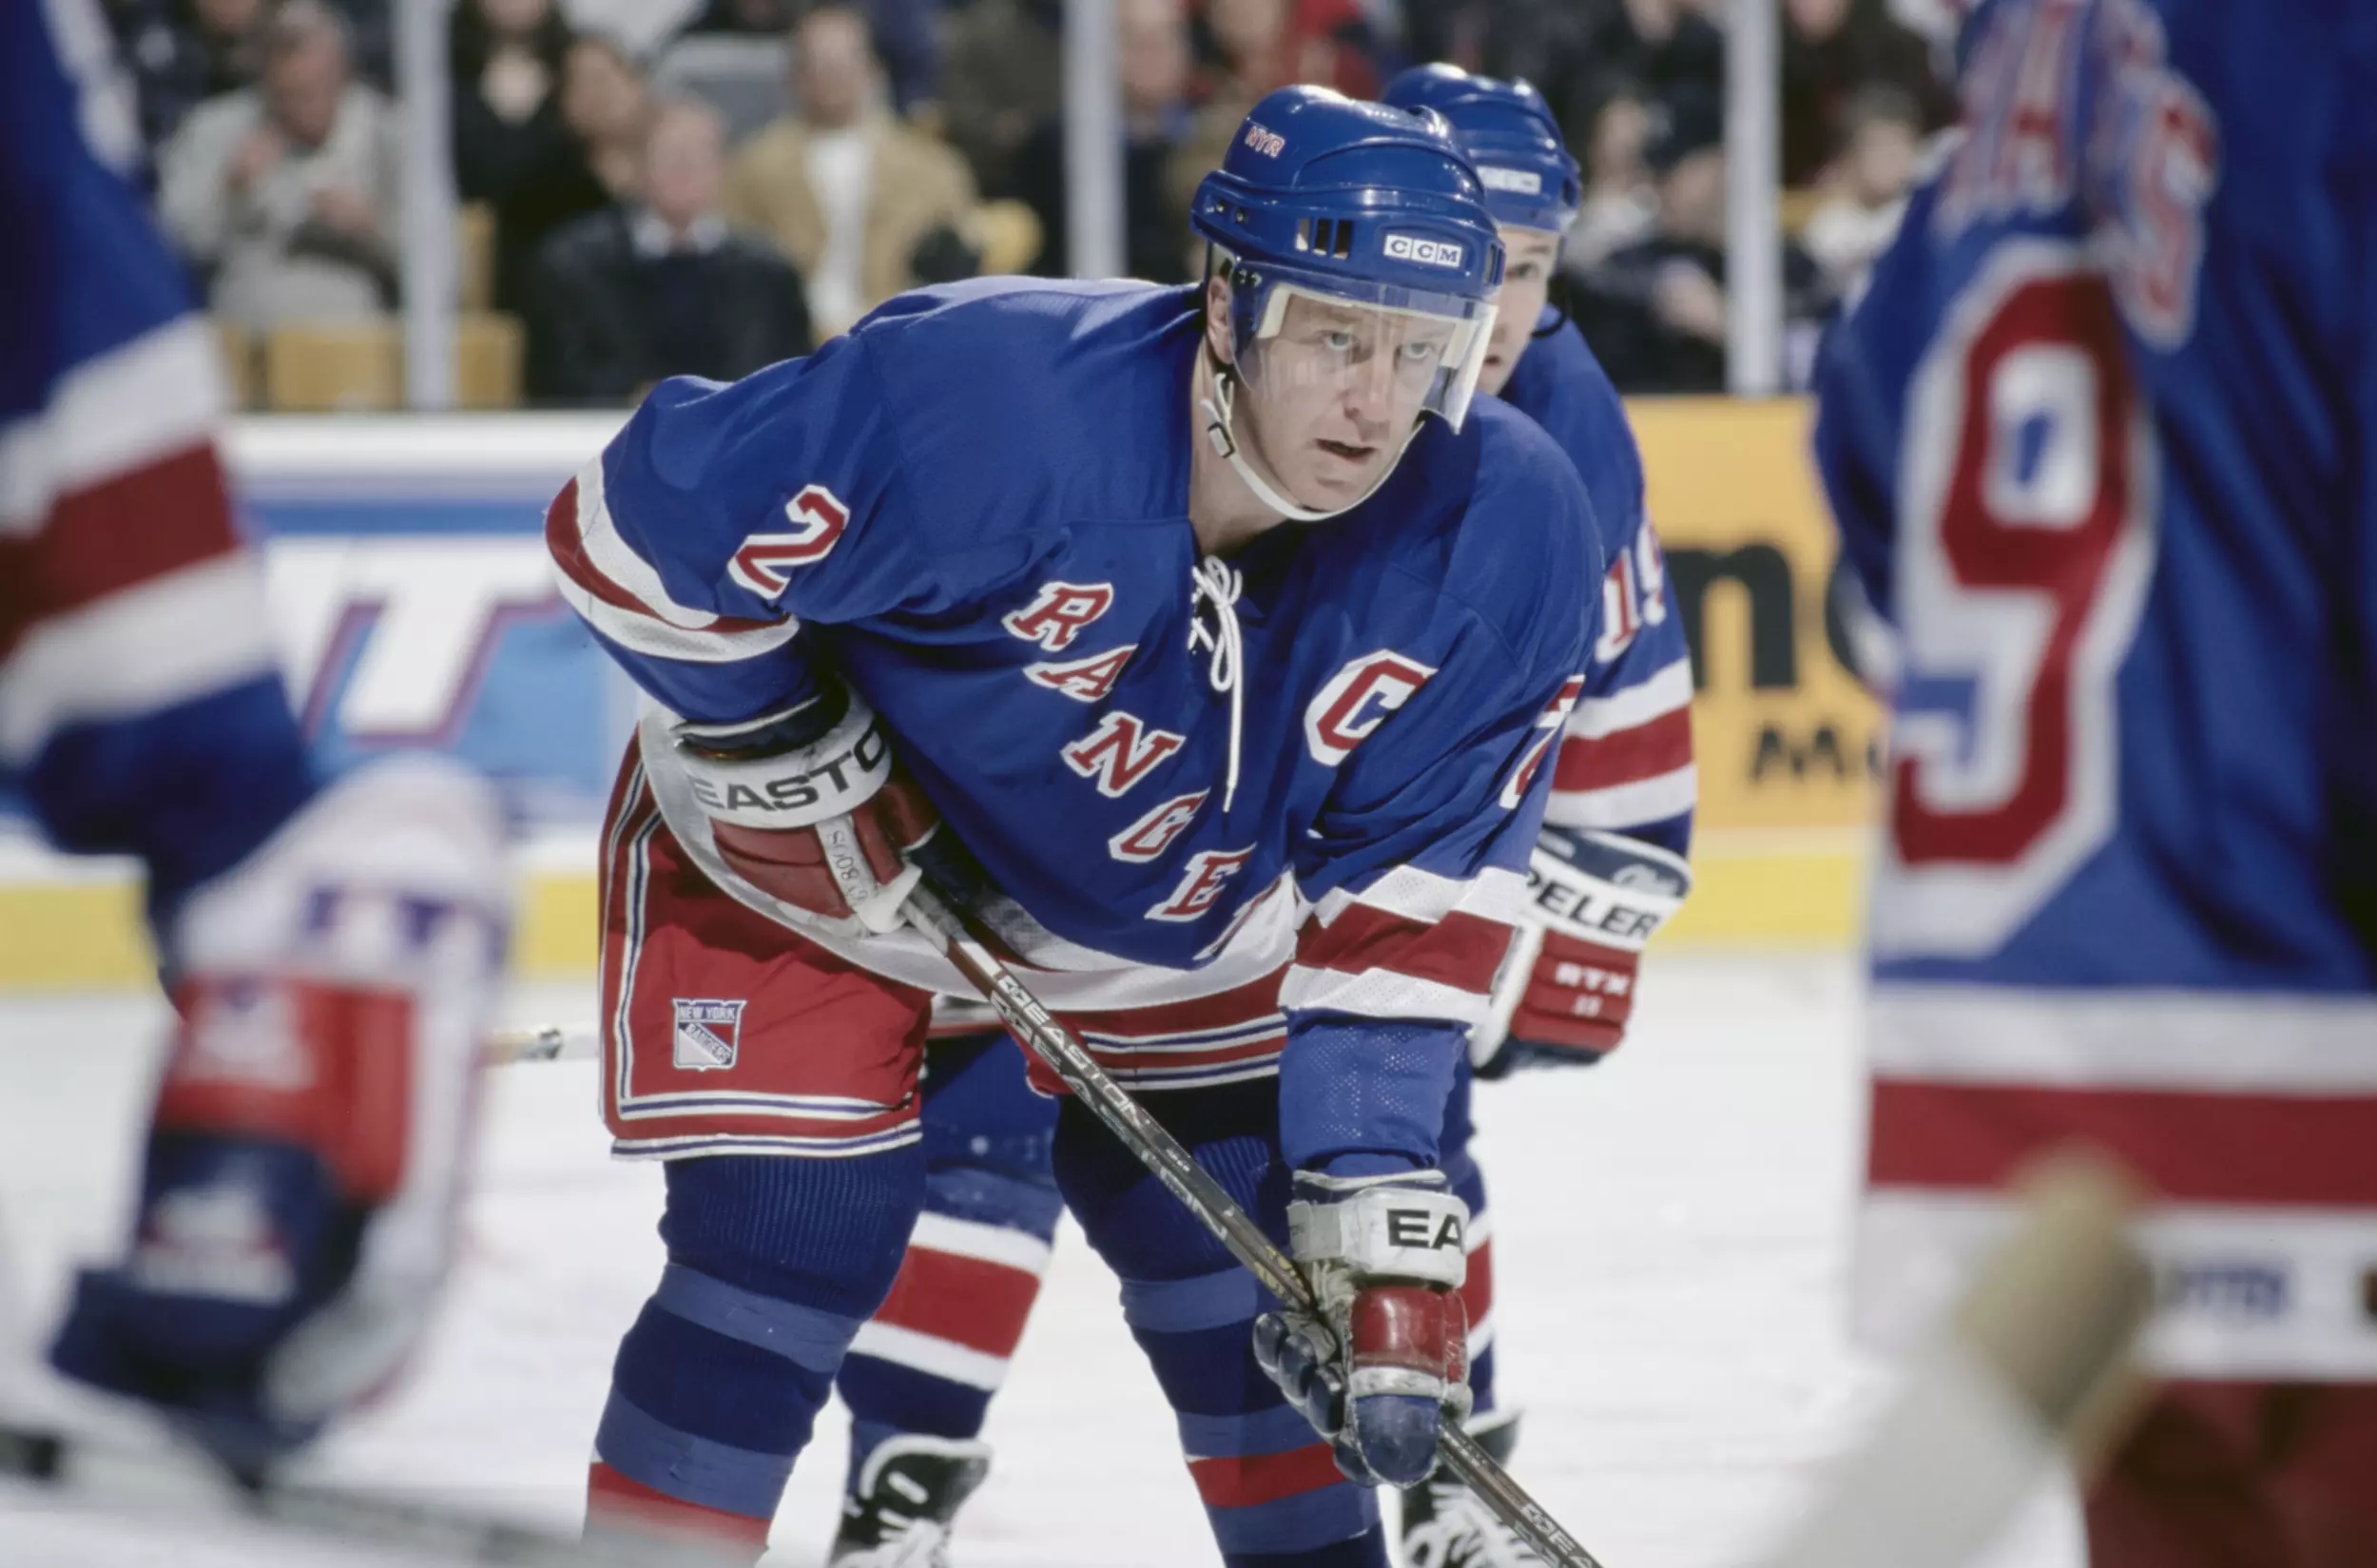 Fan HQ on X: HOCKEY FANS - Check out this sweet Derek Boogaard